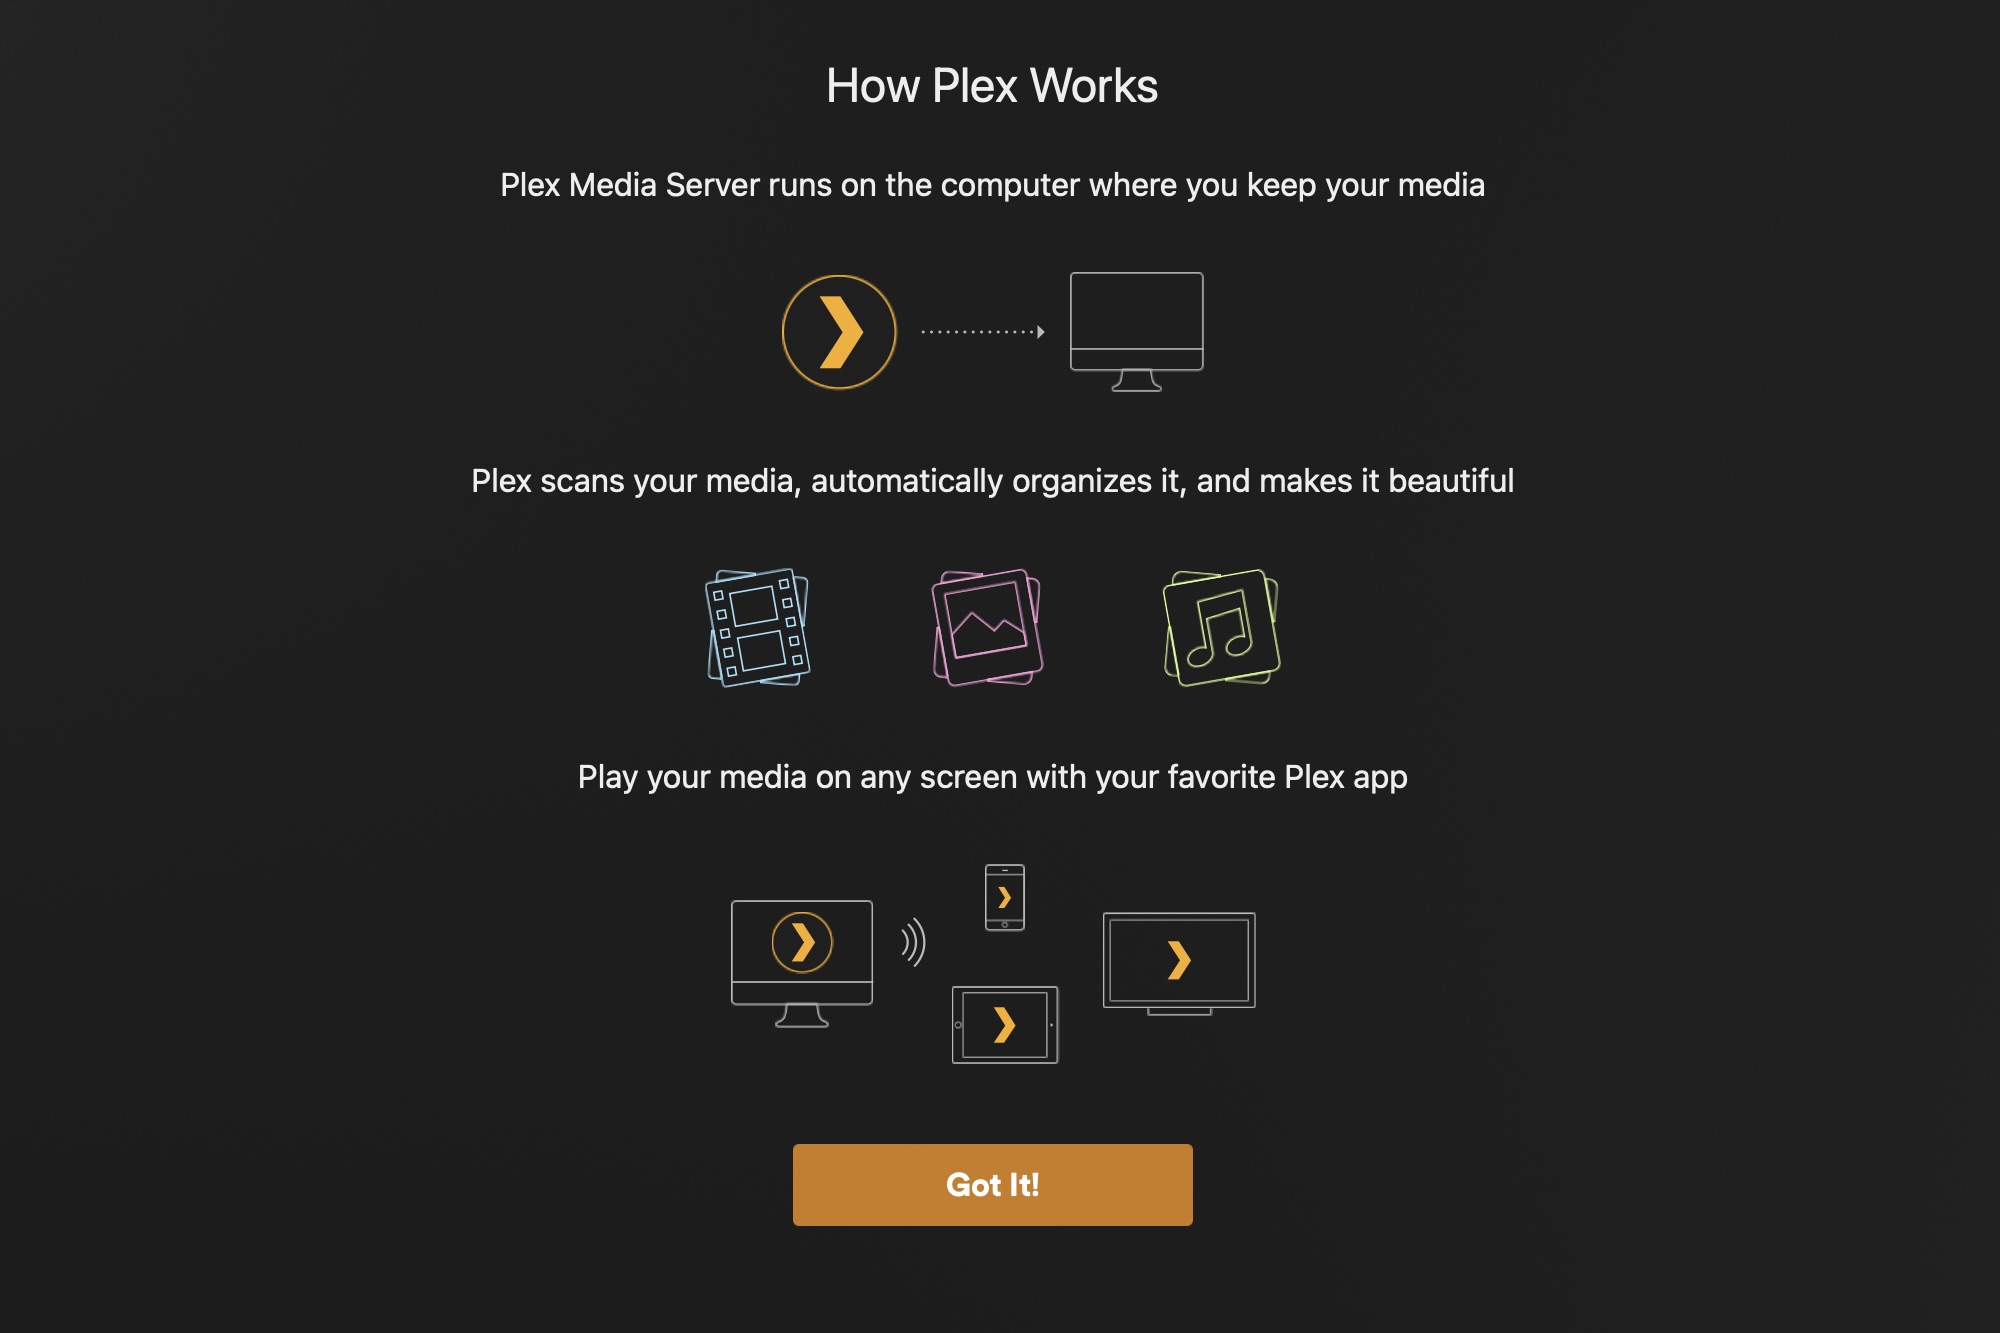 An at a glance breakdown of how Plex works.